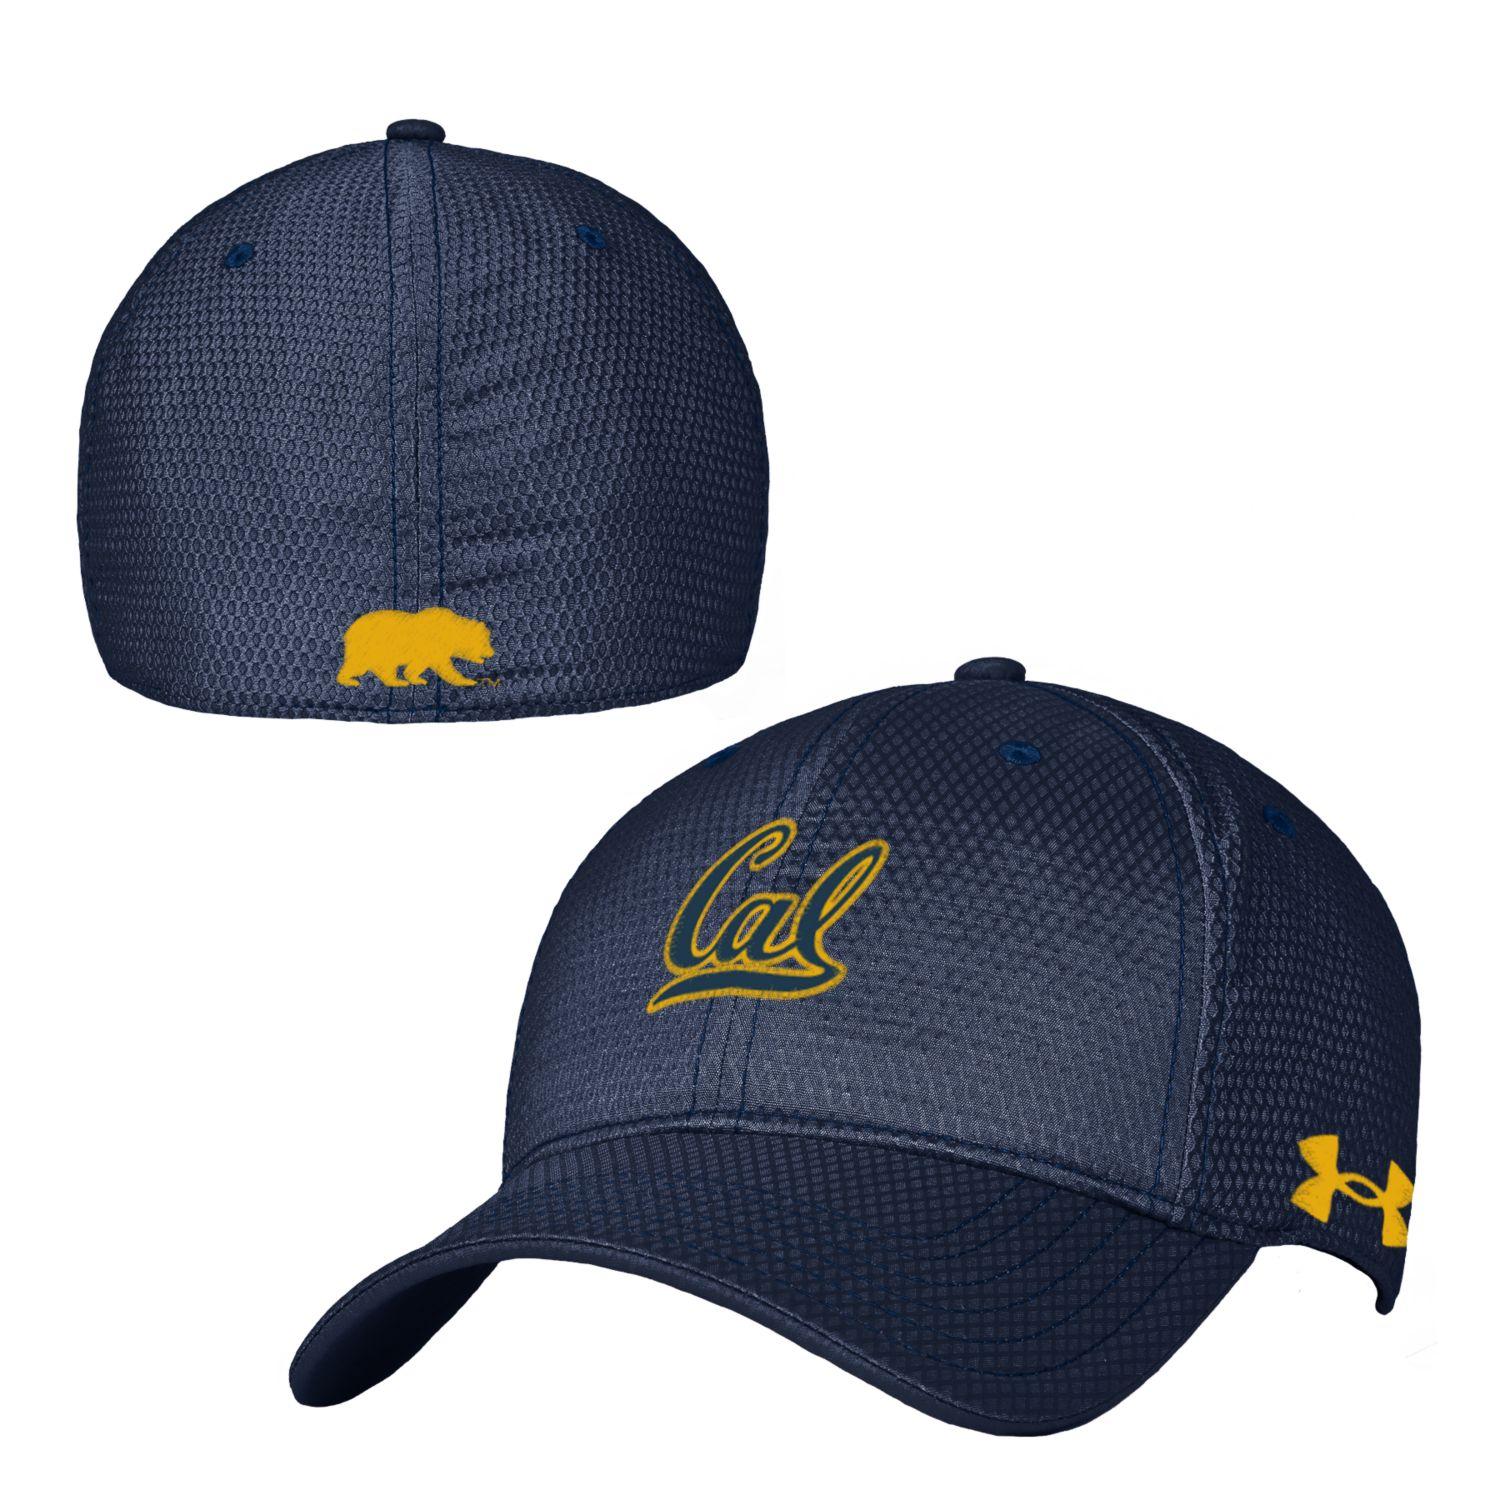 U.C. Berkeley Cal embroidered men's stretch fit performance dry Under Armour hat-Navy-Shop College Wear